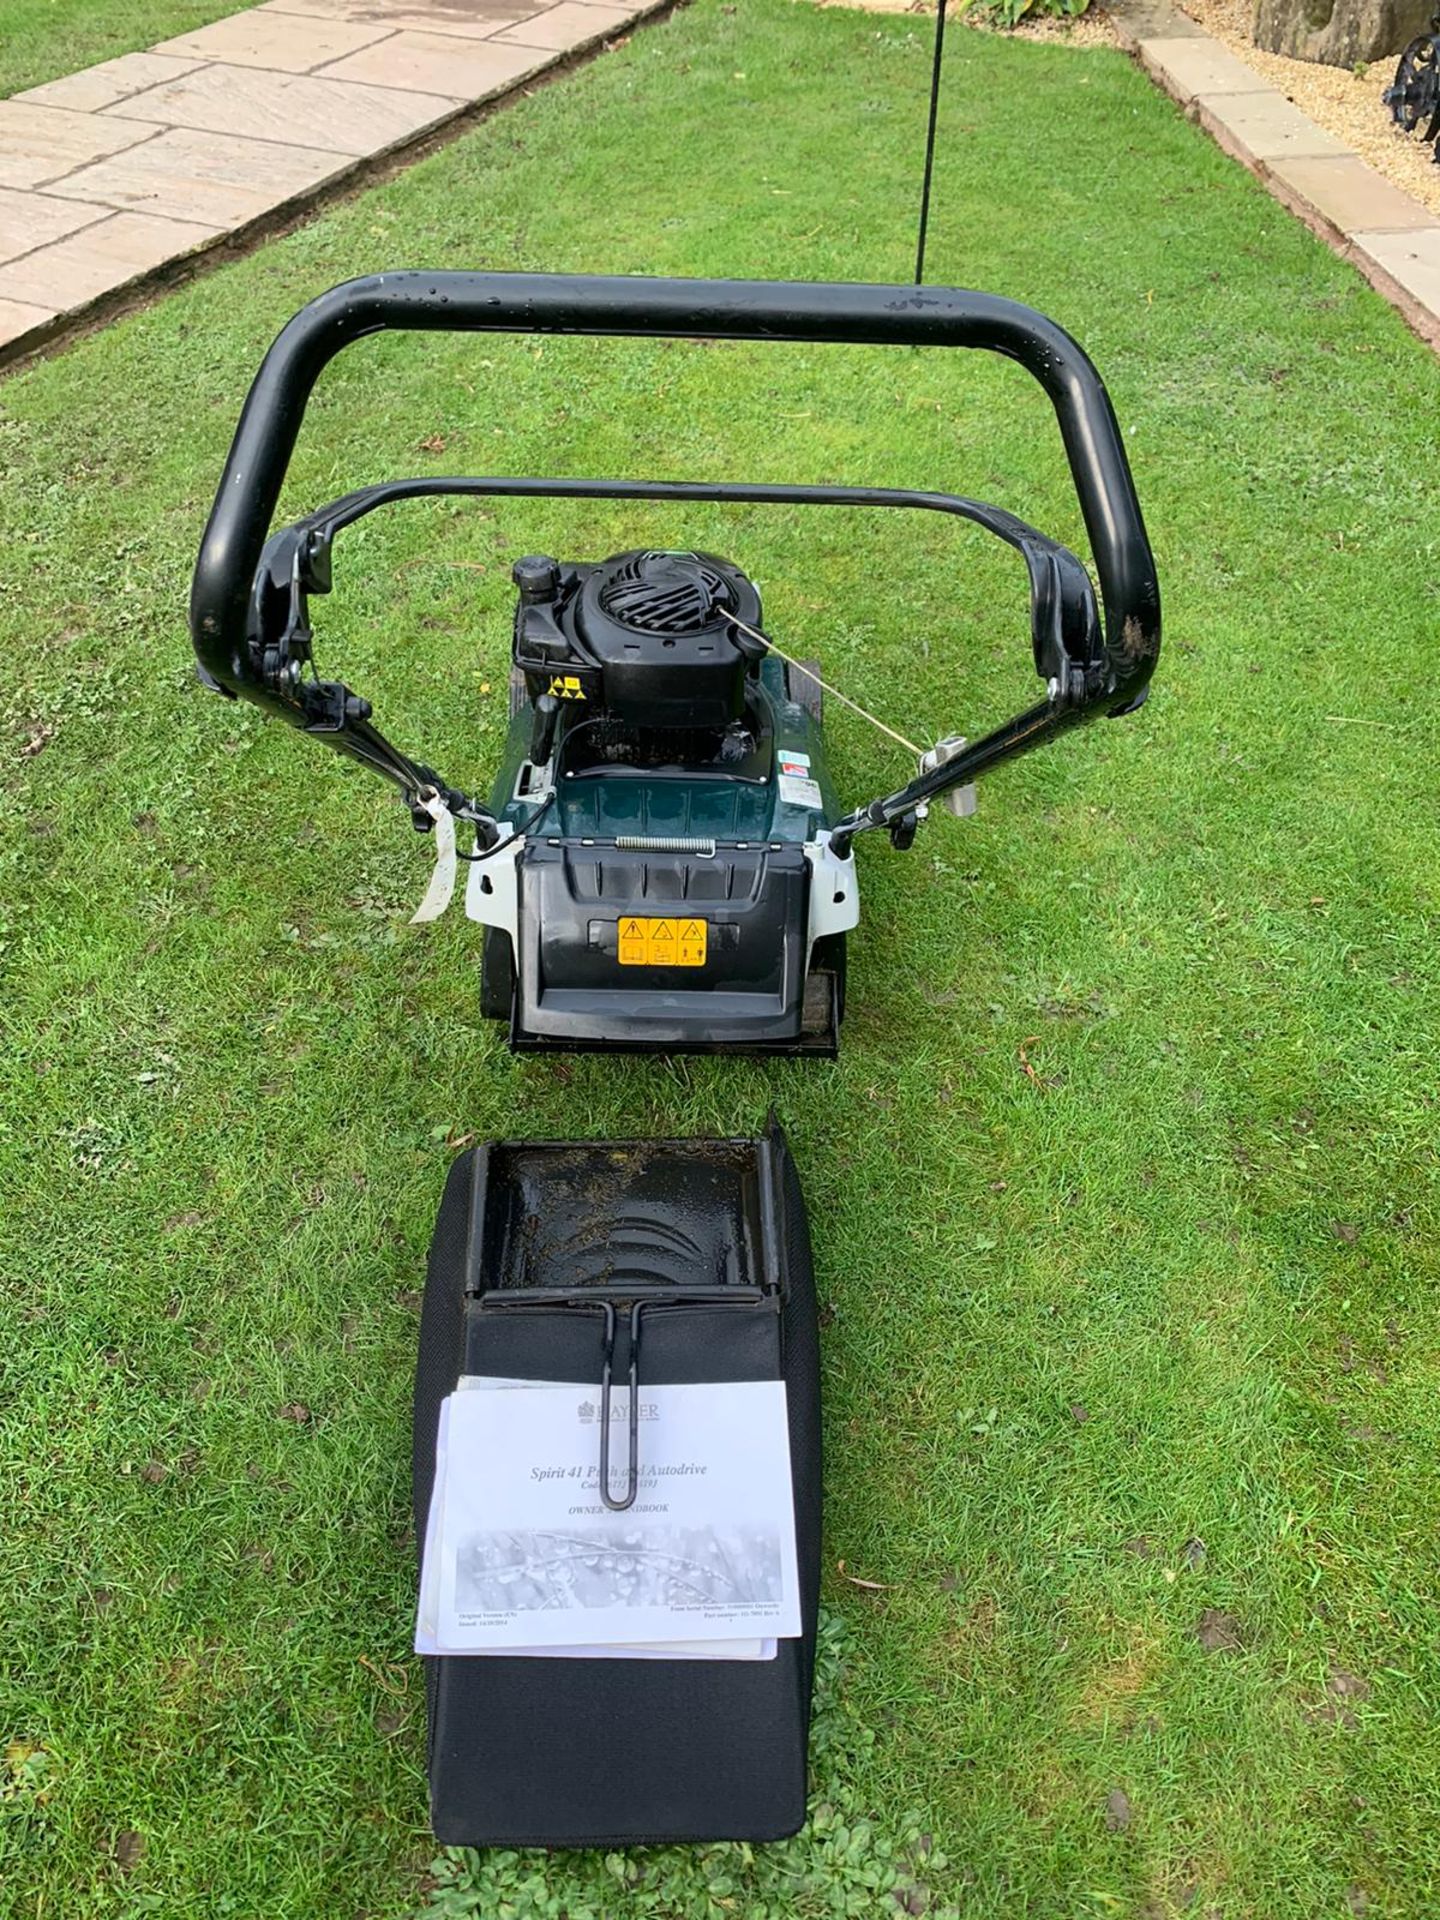 HAYTER 41 SPIRIT WITH ROLLER, PUSH MOWER, RUNS, DRIVES AND CUTS, WITH ORIGINAL PAPERWORK *NO VAT* - Image 2 of 4